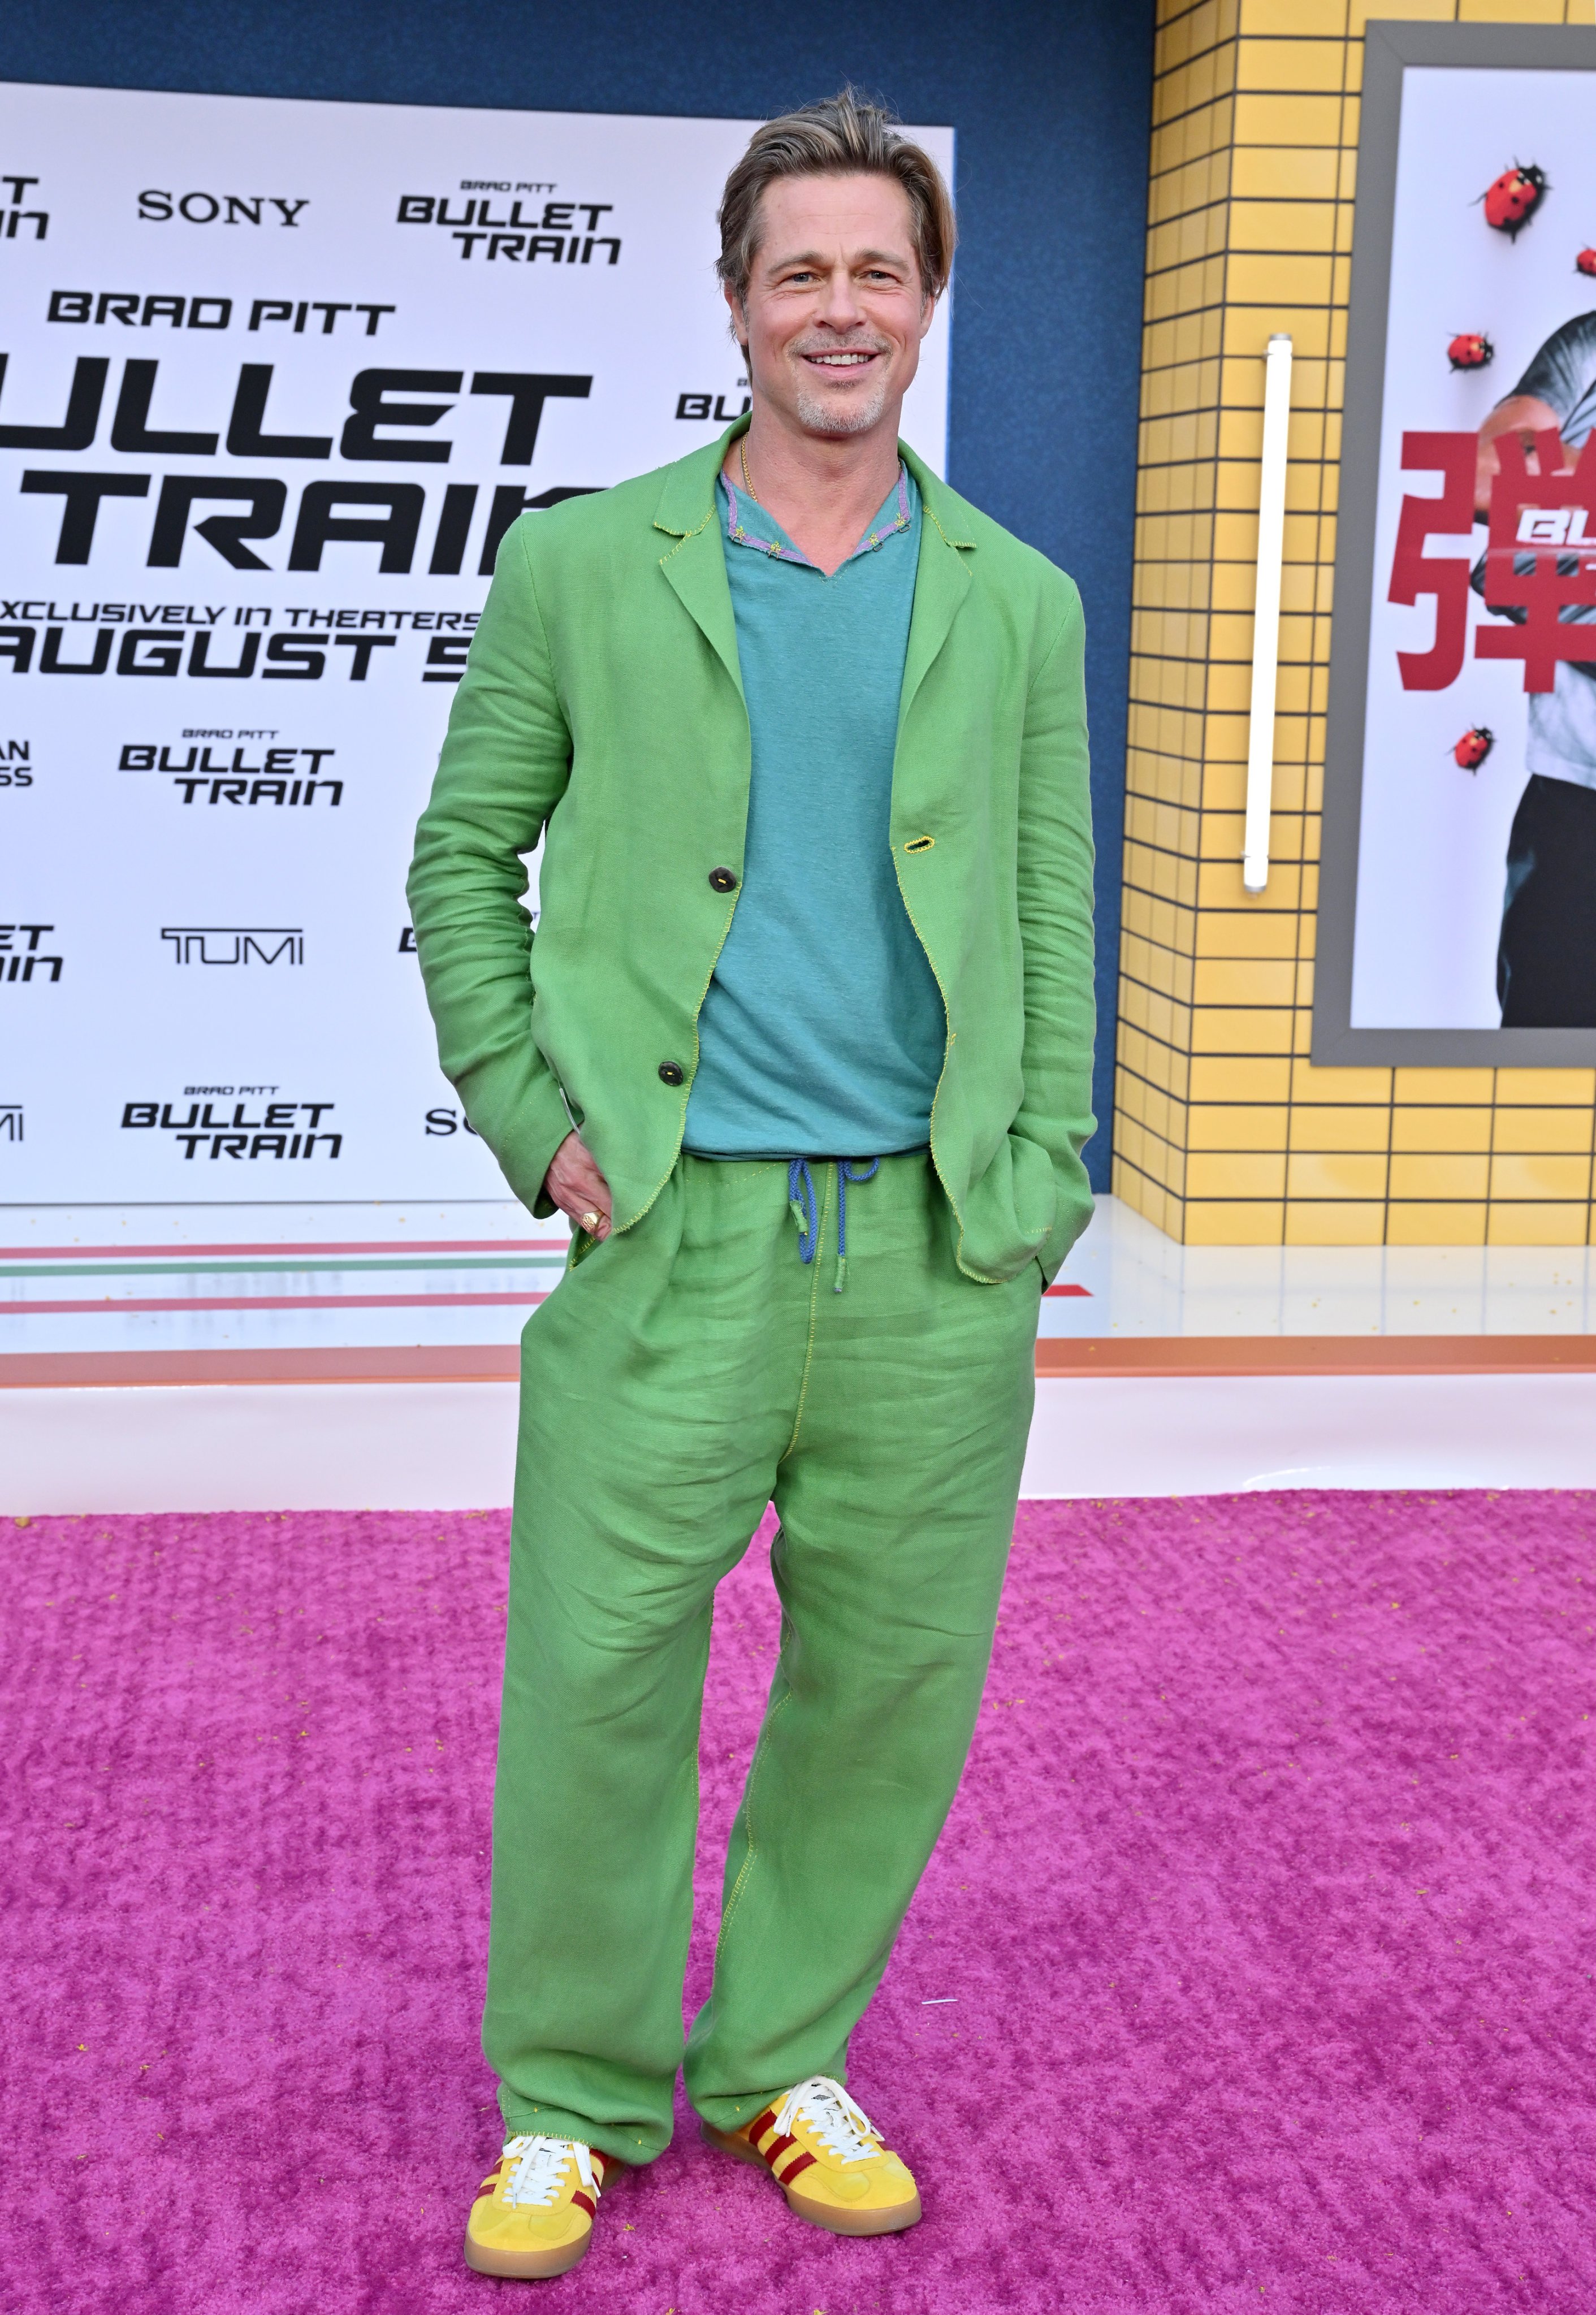 Brad Pitt’s young, colourful look, worn for a 2022 premiere of his film Bullet Train, set tongues wagging about who might have inspired his new, fresher style. Photo: FilmMagic